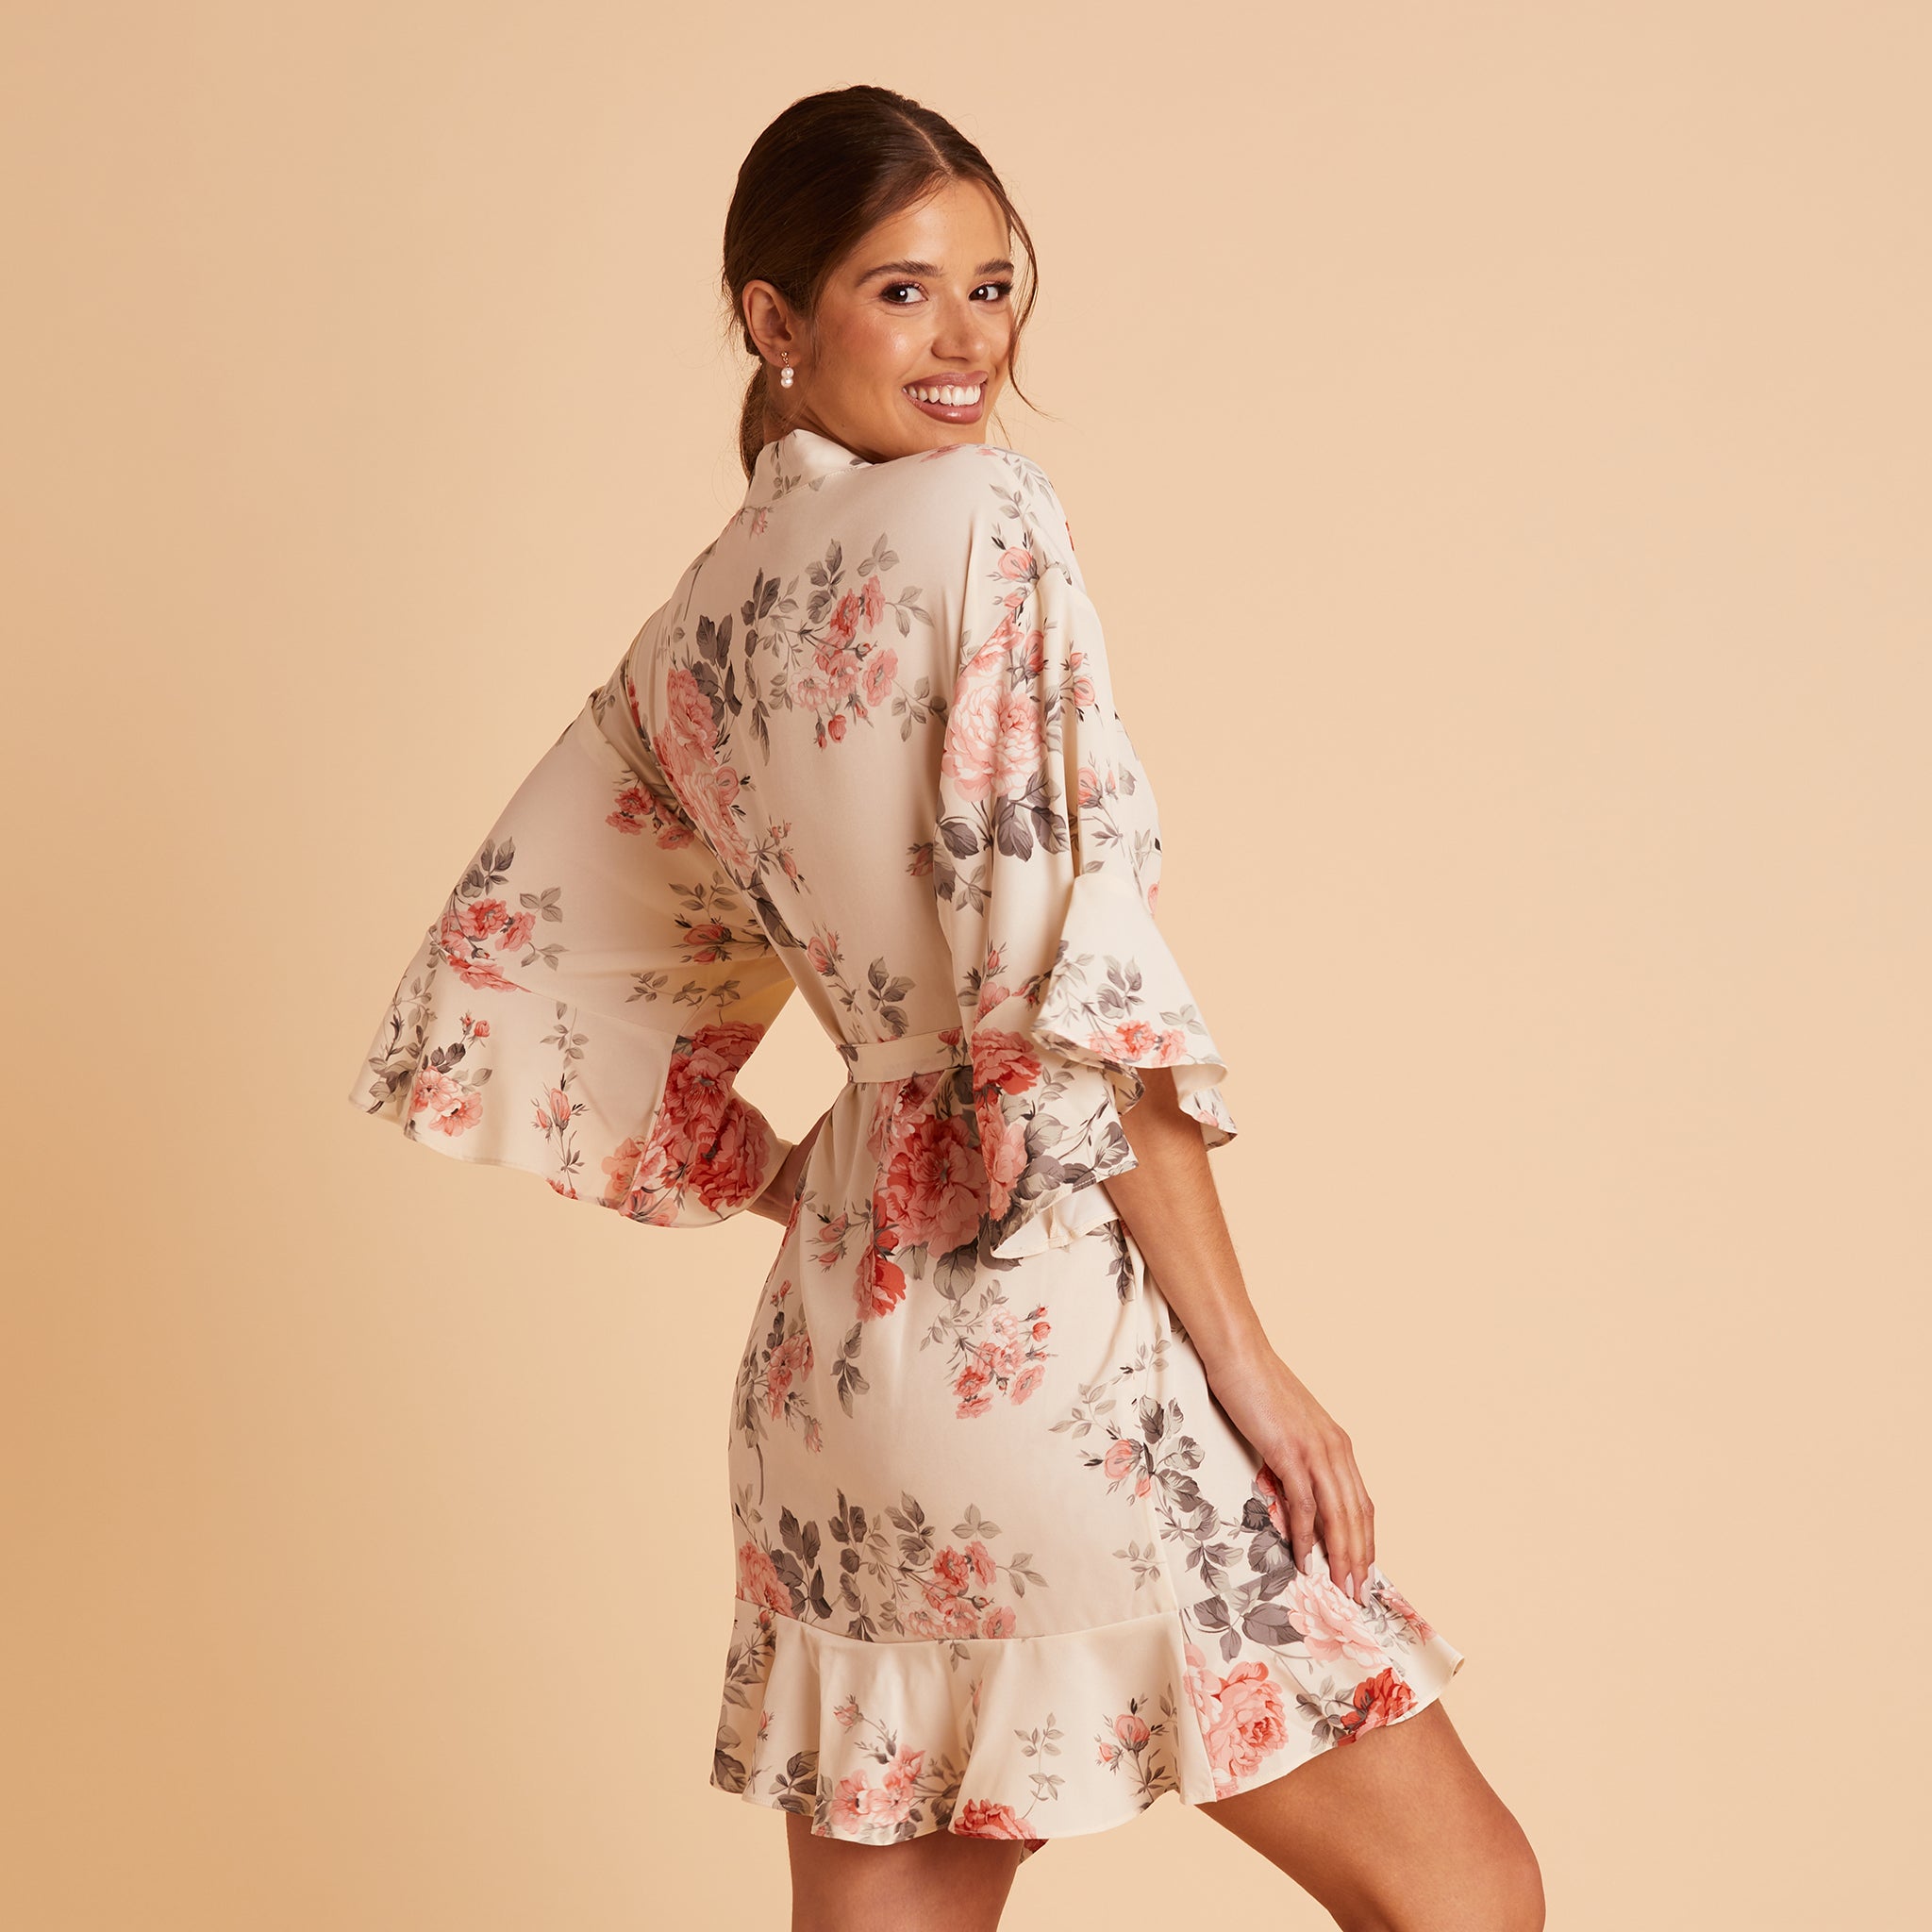 Kenny Ruffle Robe in Cream Floral by Birdy Grey, side view